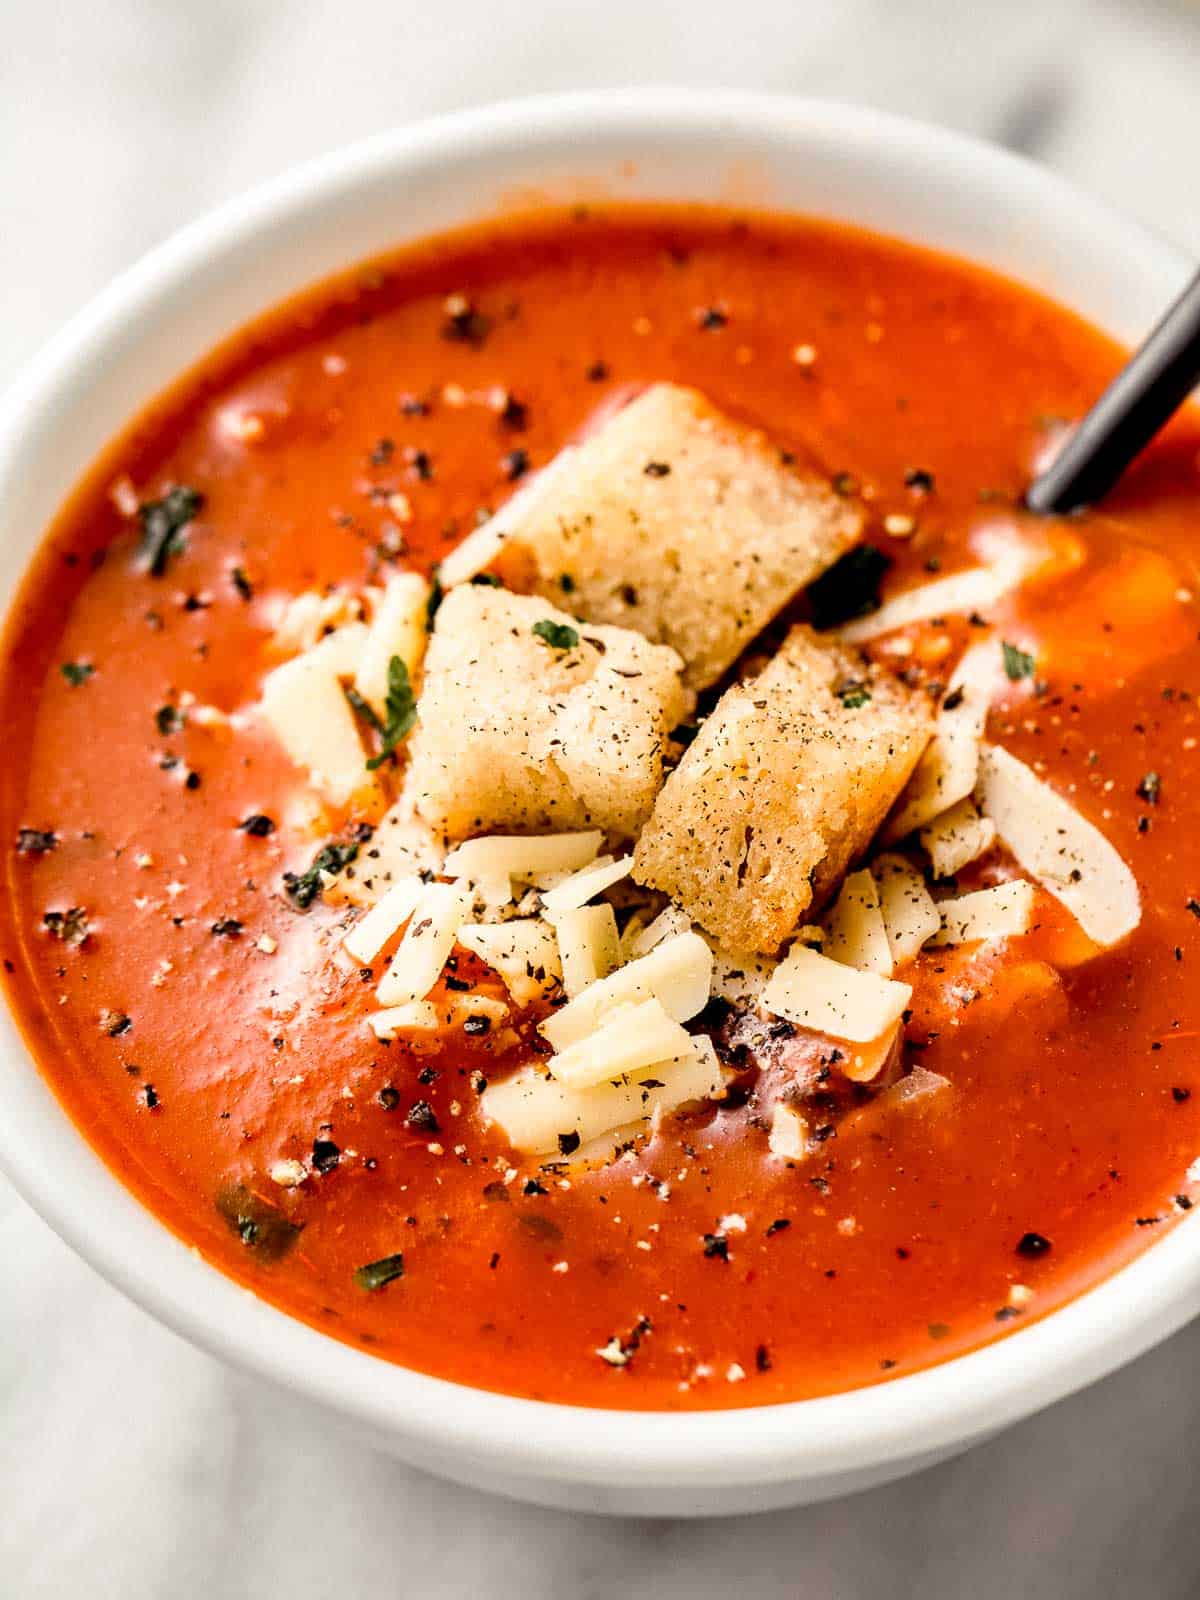 Homemade tomato soup in a bowl with croutons.